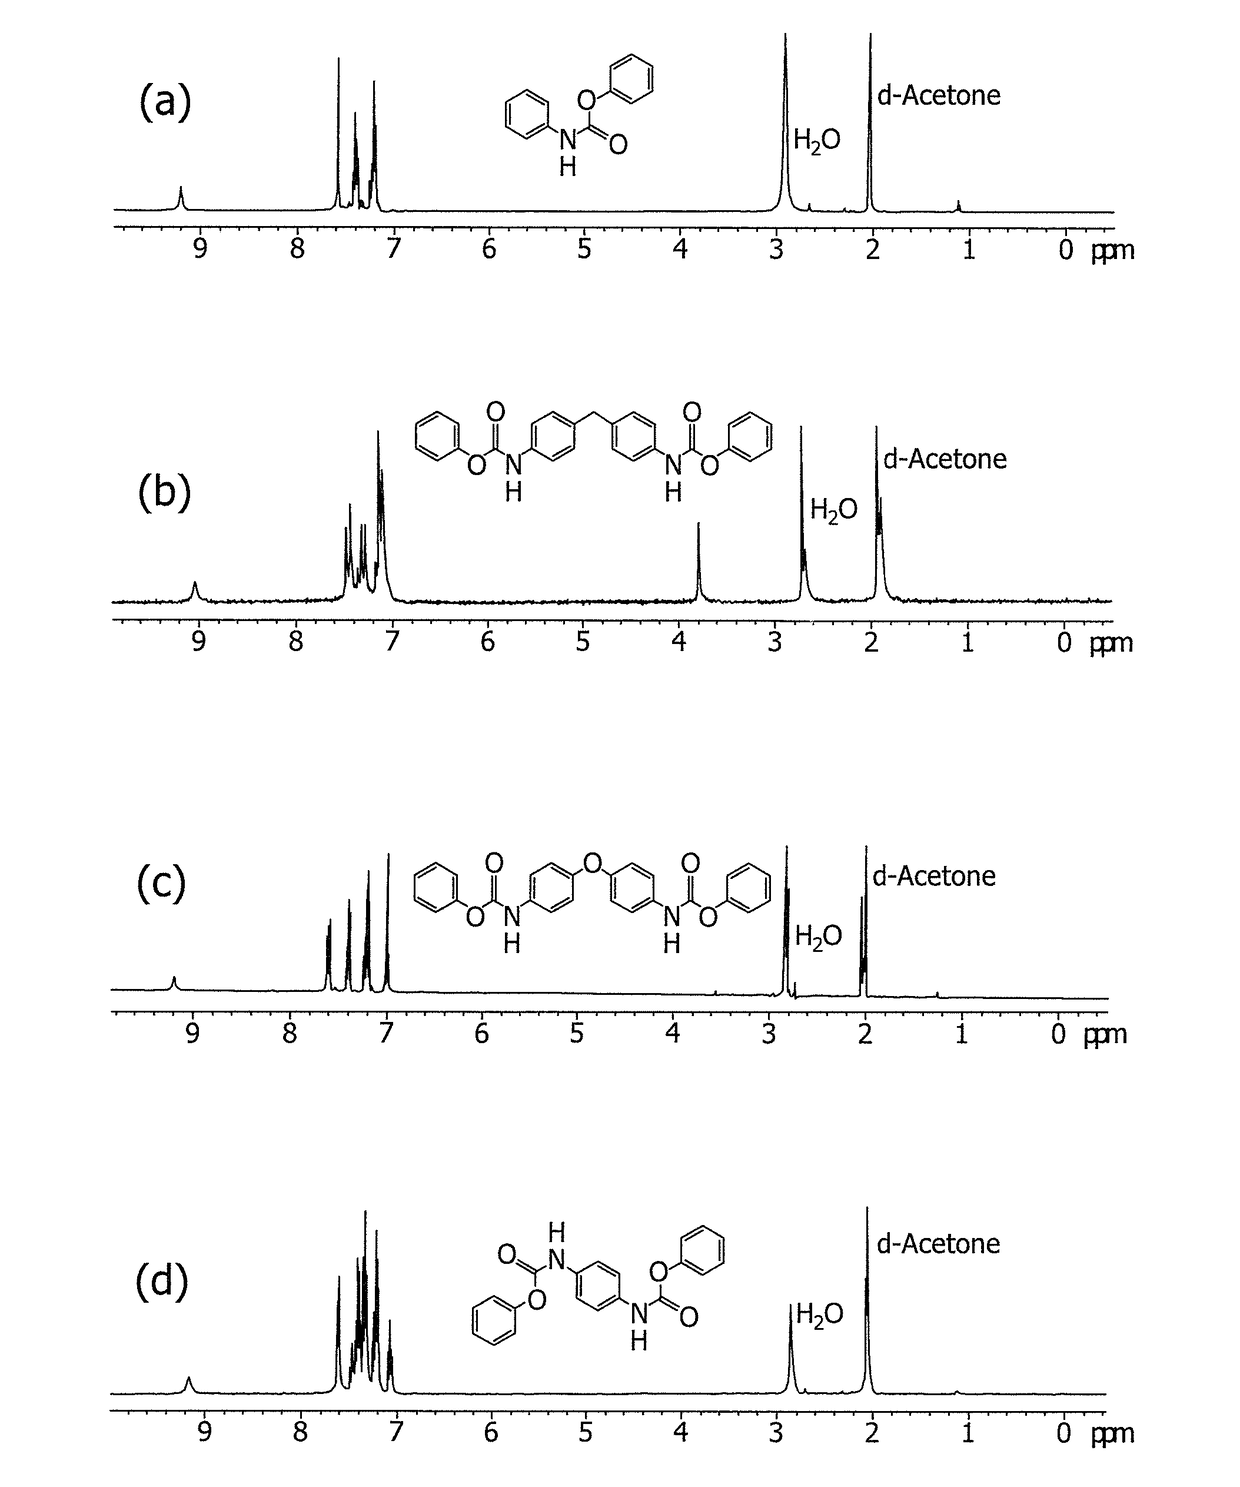 Method for producing amides or polyamides by using aromatic carbamates by way of isocyanates as precursors through catalyzed thermal processes and method for producing aromatic carbamate precursors from aromatic amines